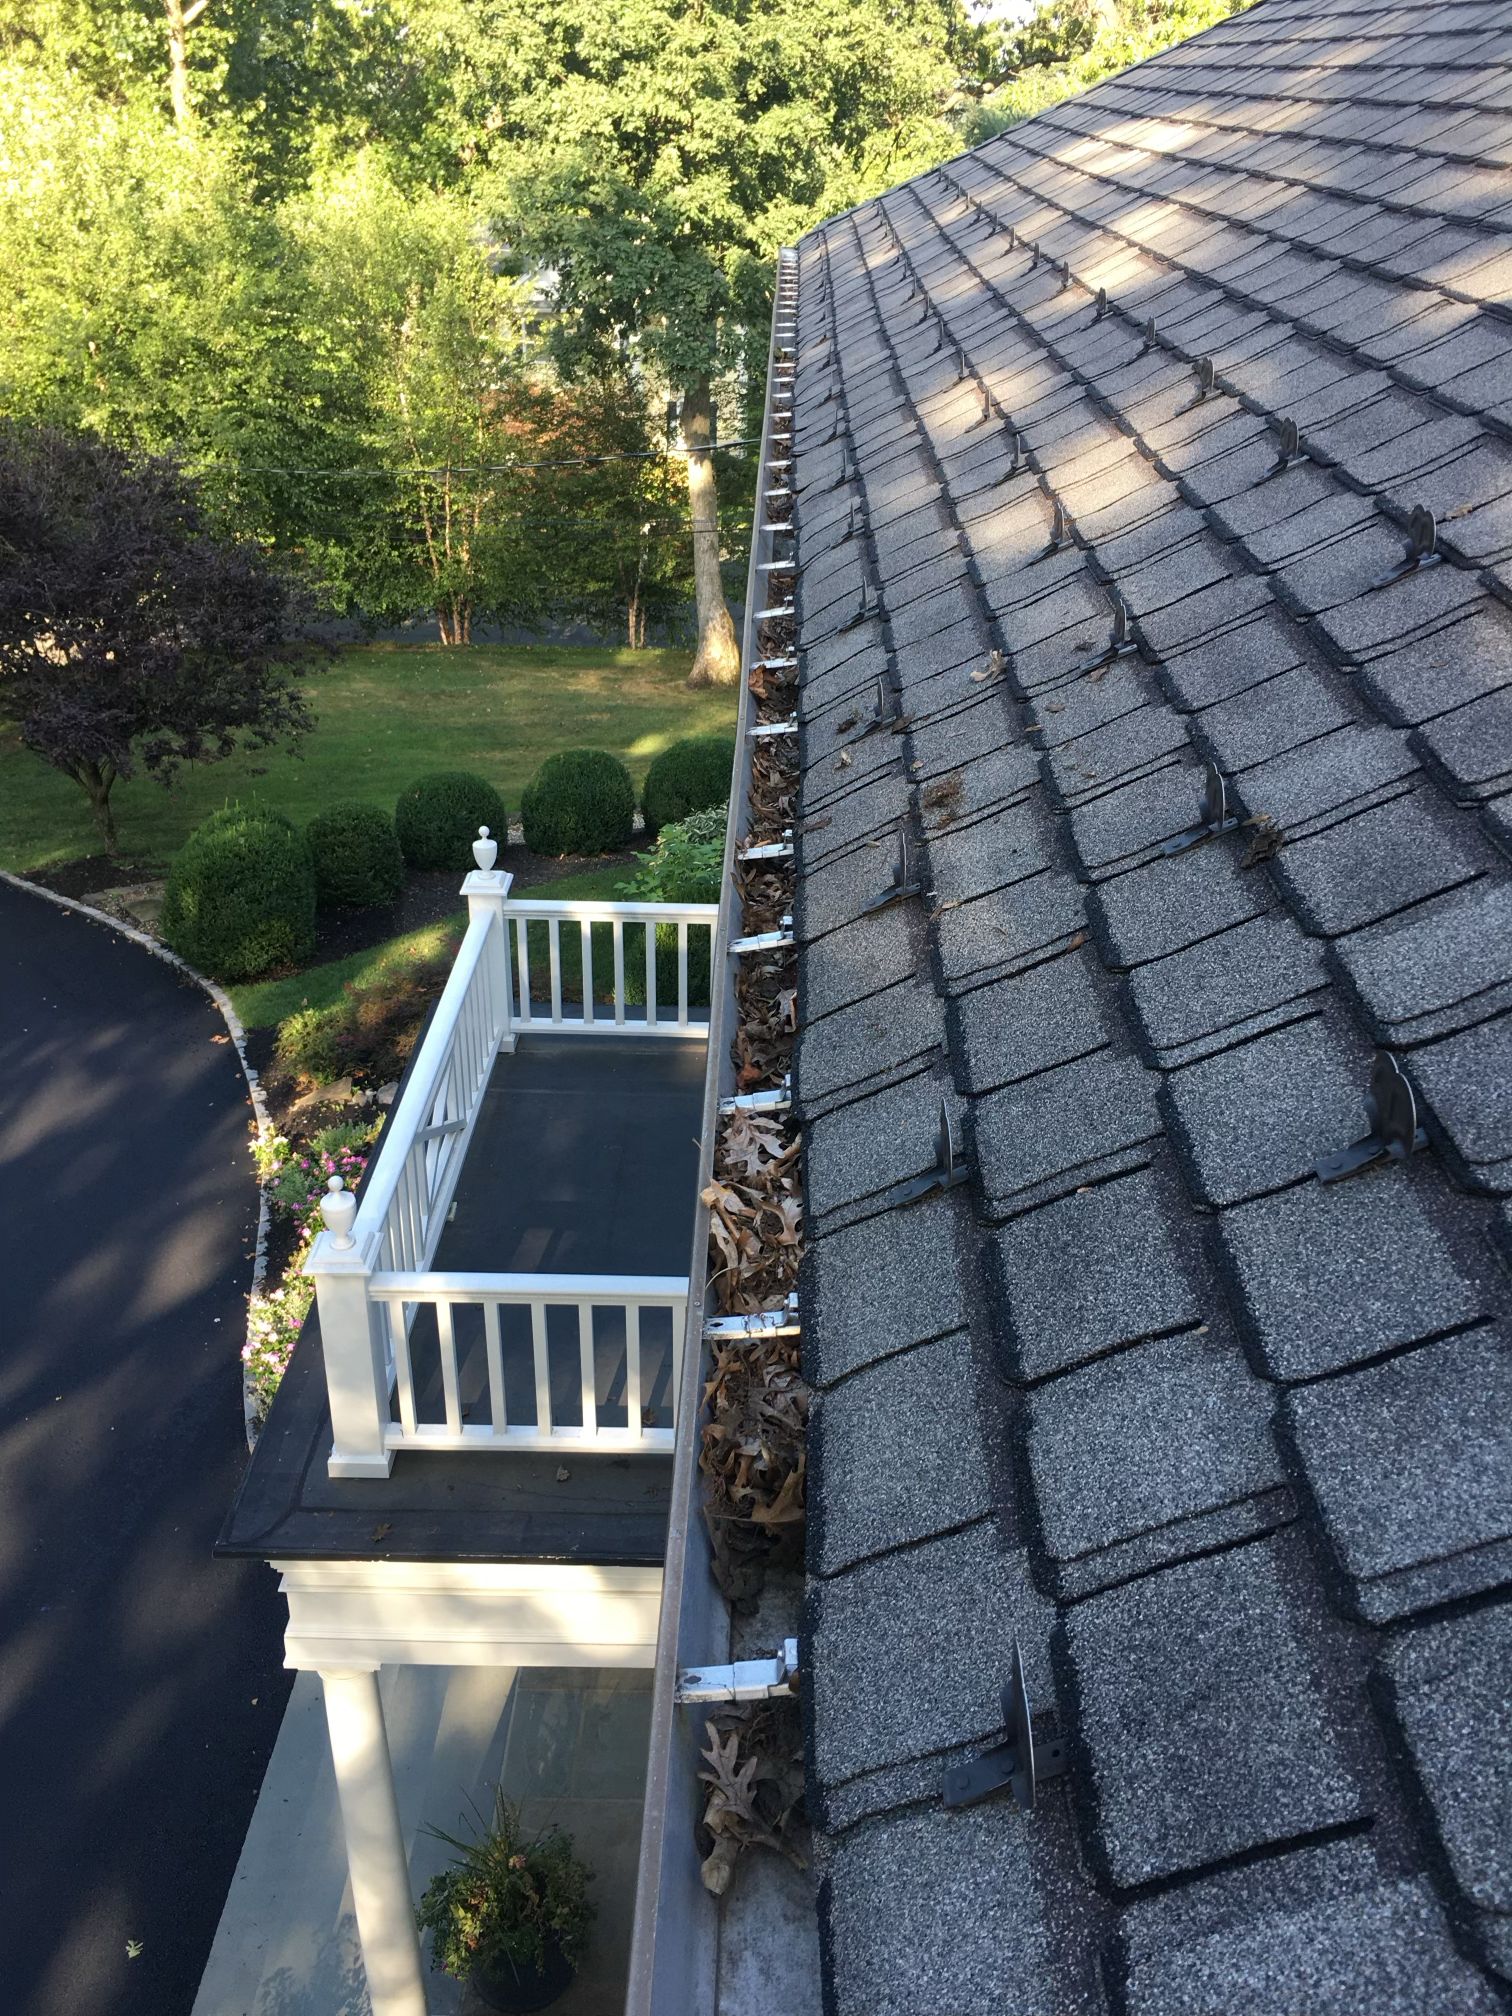 Best gutter cleaning company in New Jersey